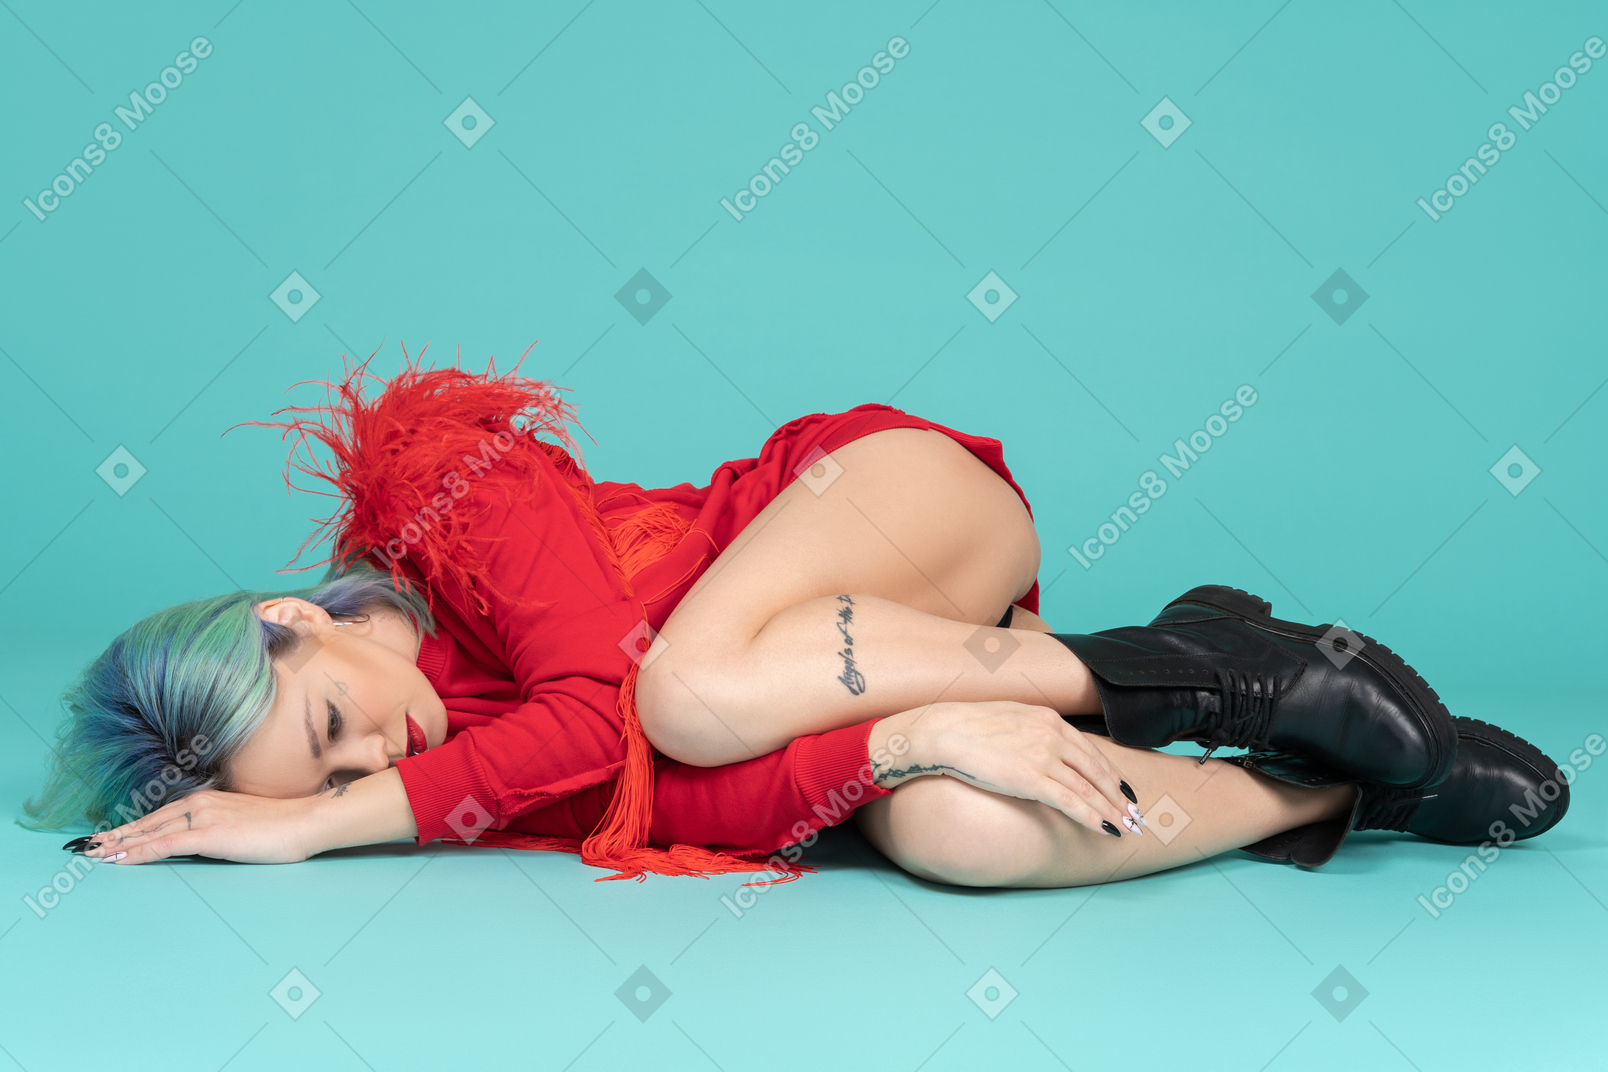 Sleeping young woman curling up in a ball